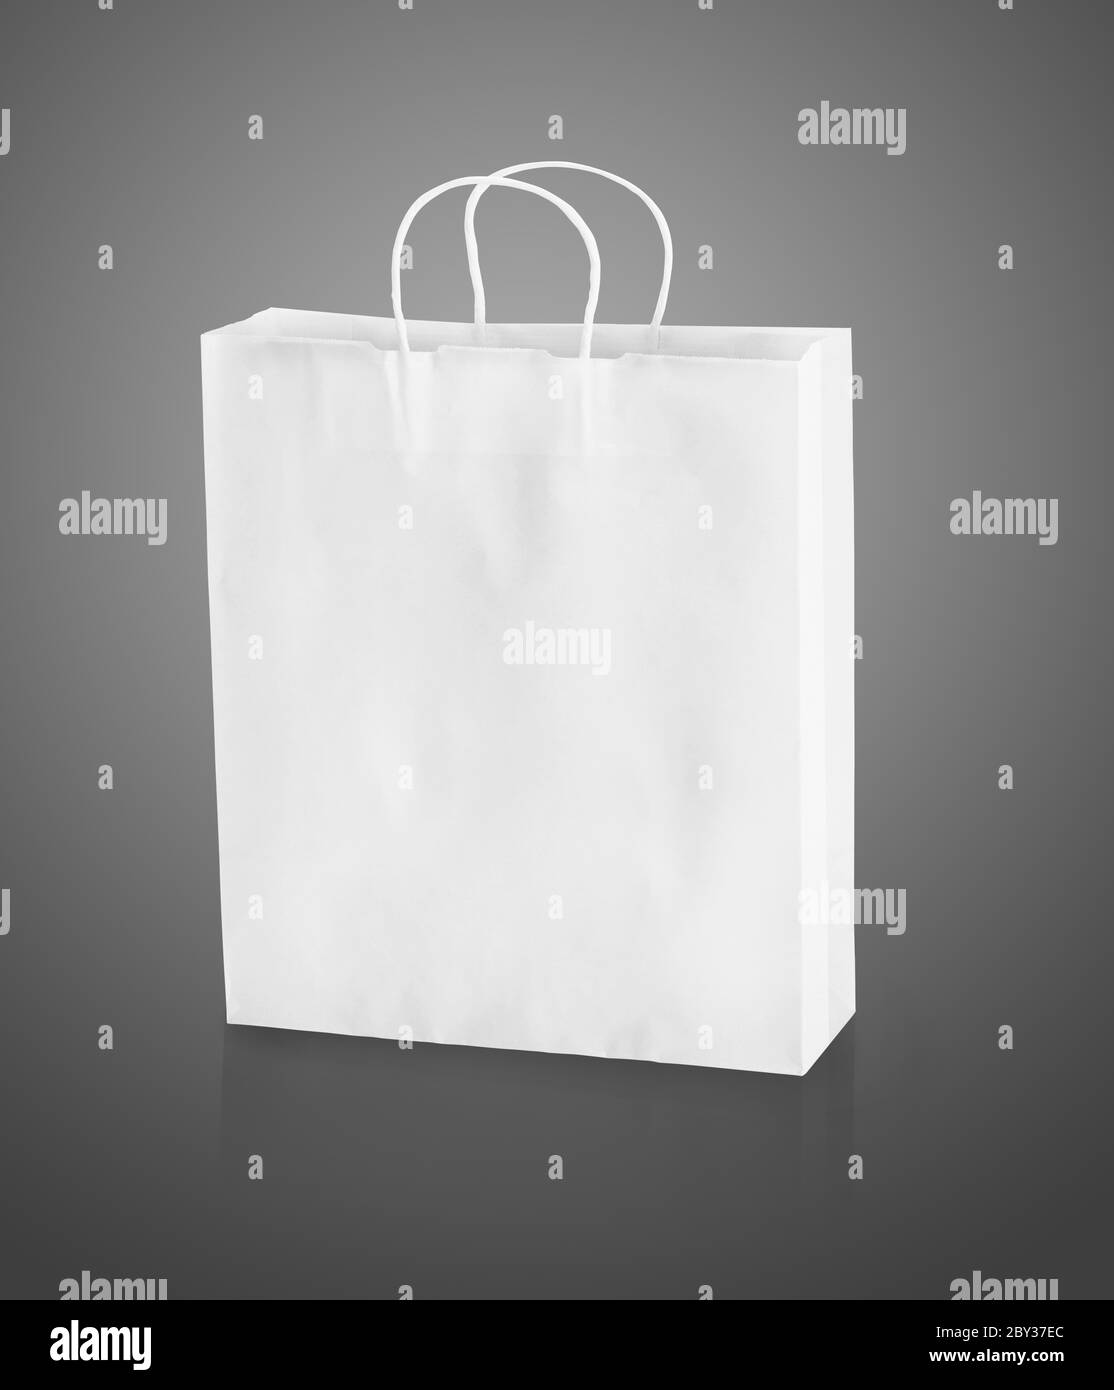 Carrier bag paper Black and White Stock Photos & Images - Alamy